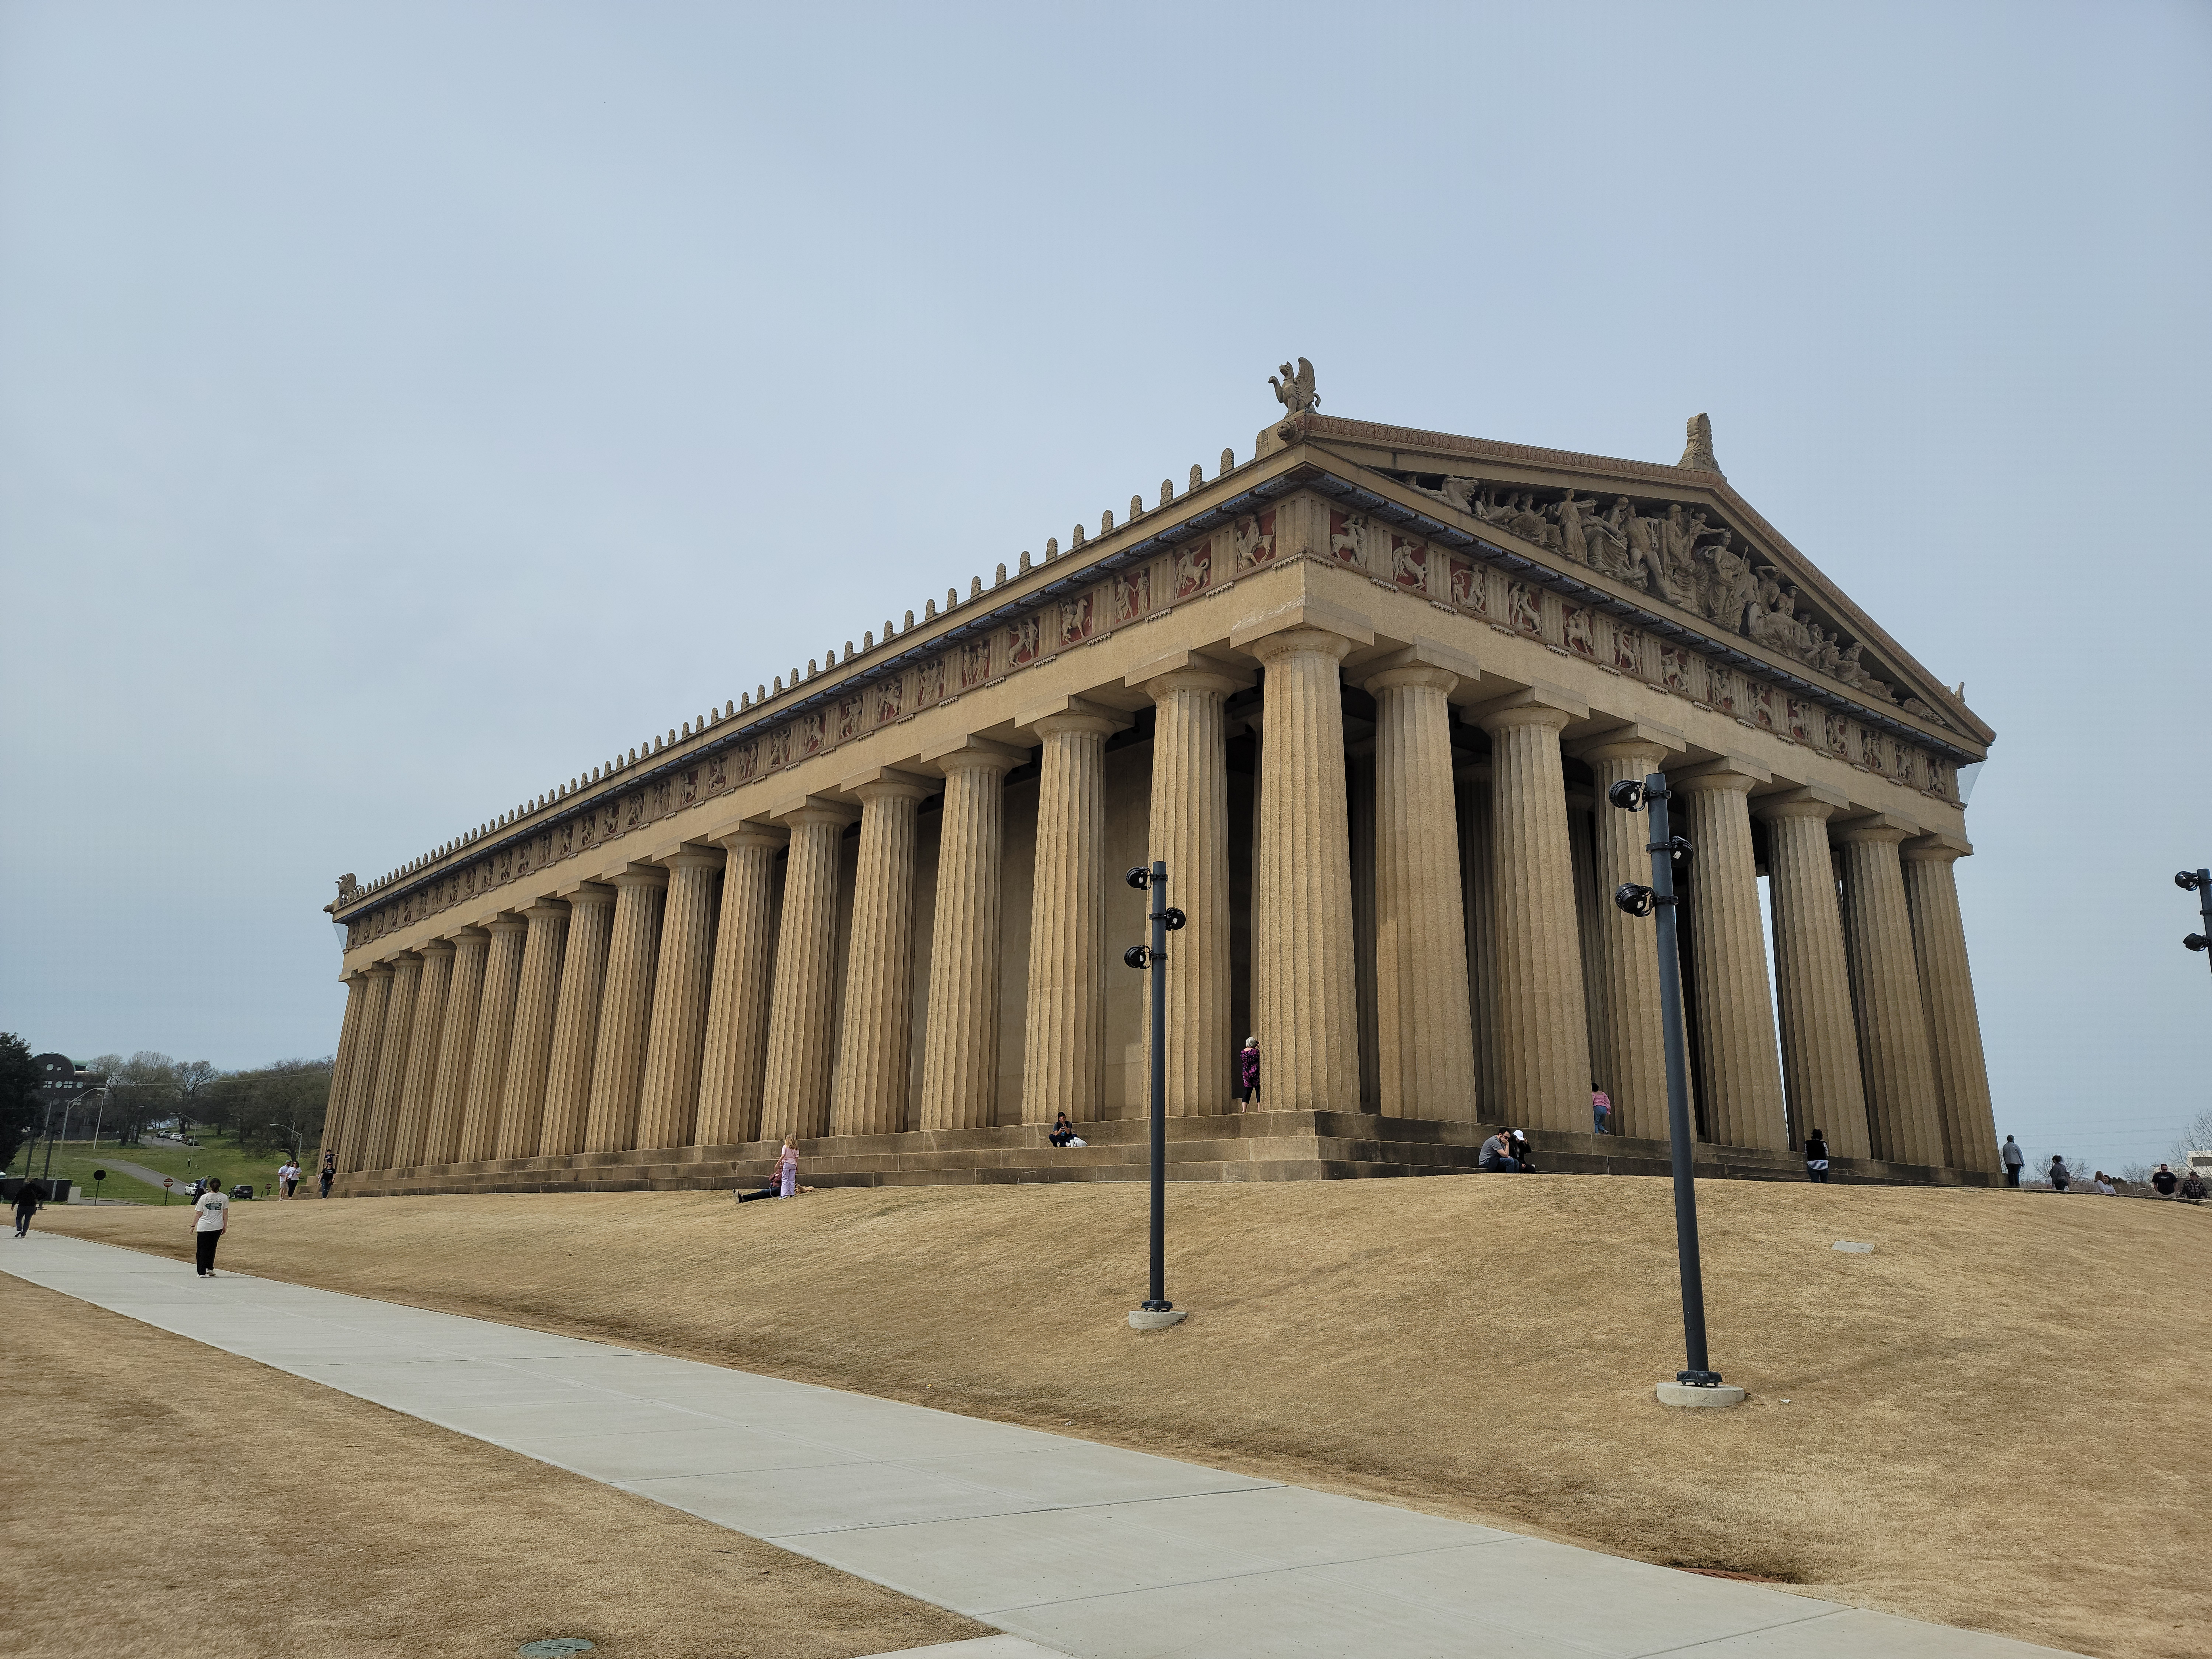 Picture of a place: The Parthenon